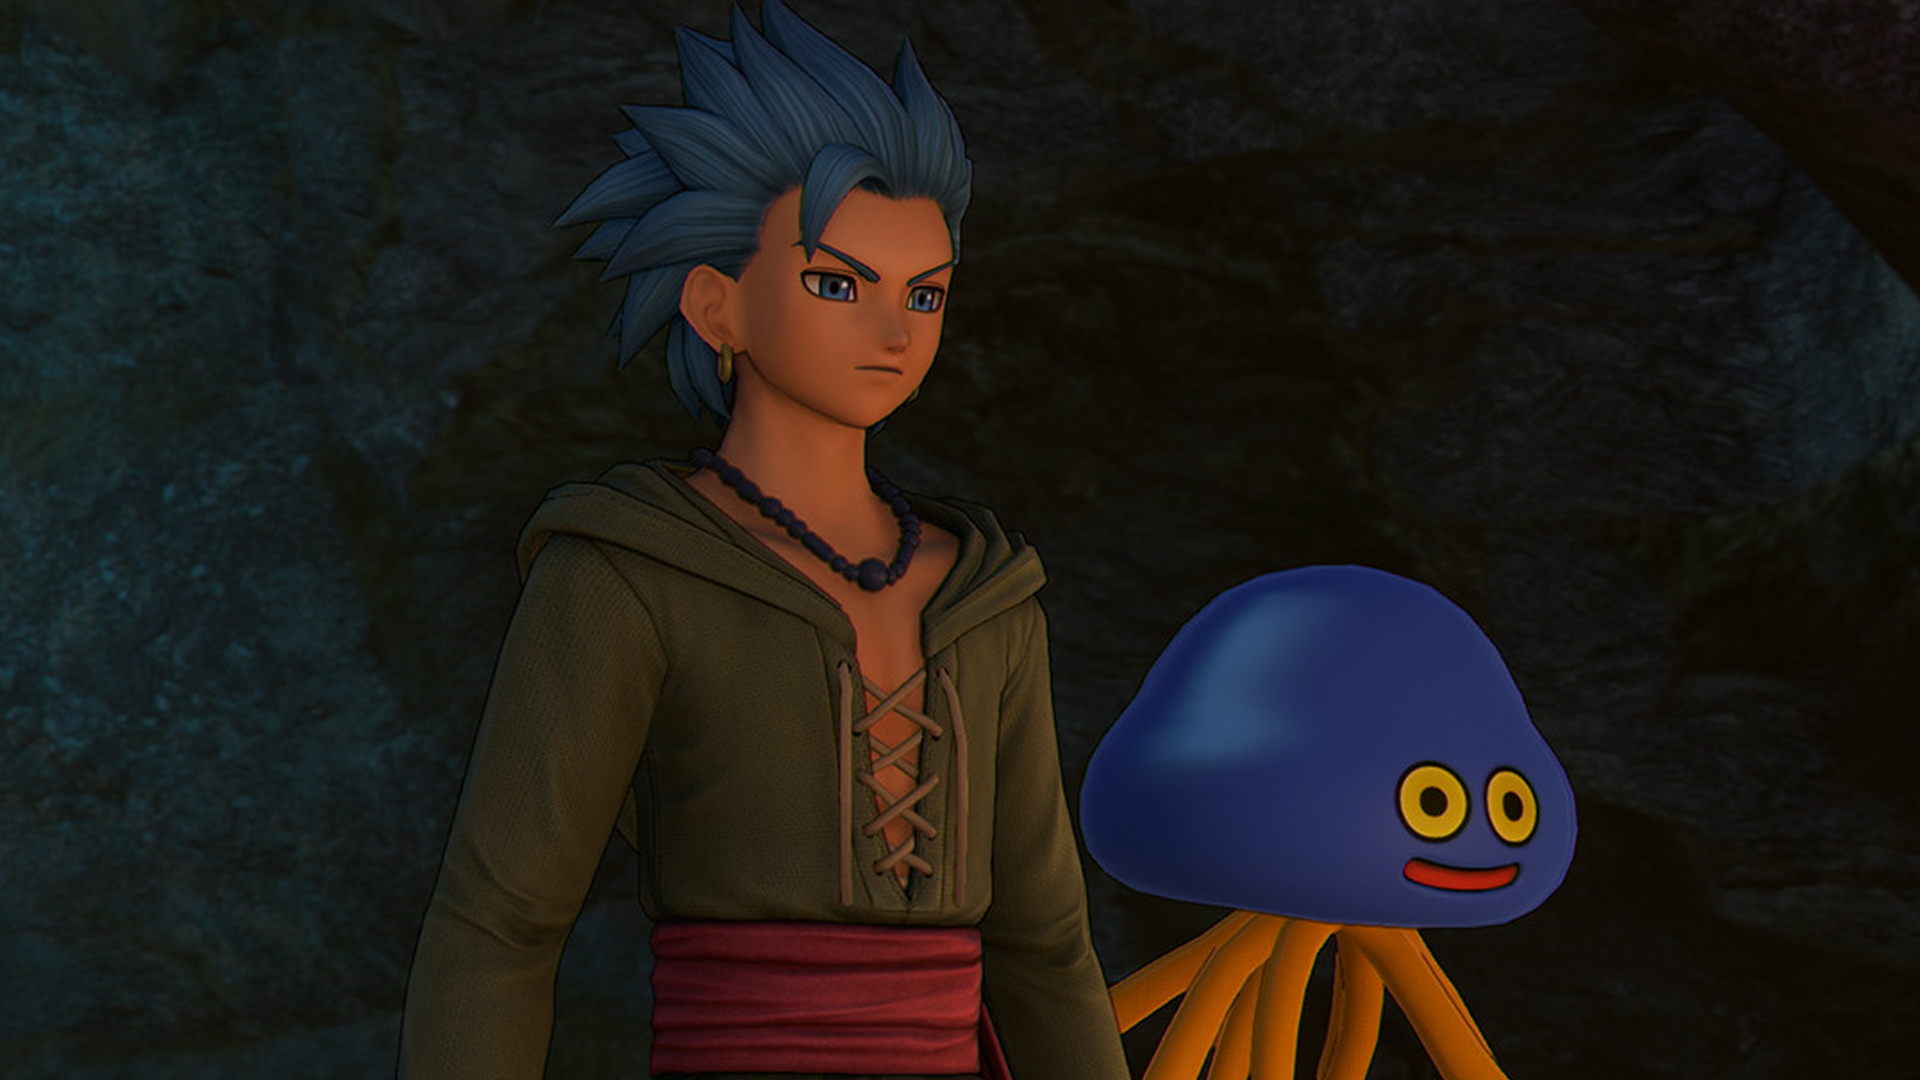 dragon quest 11 character slime